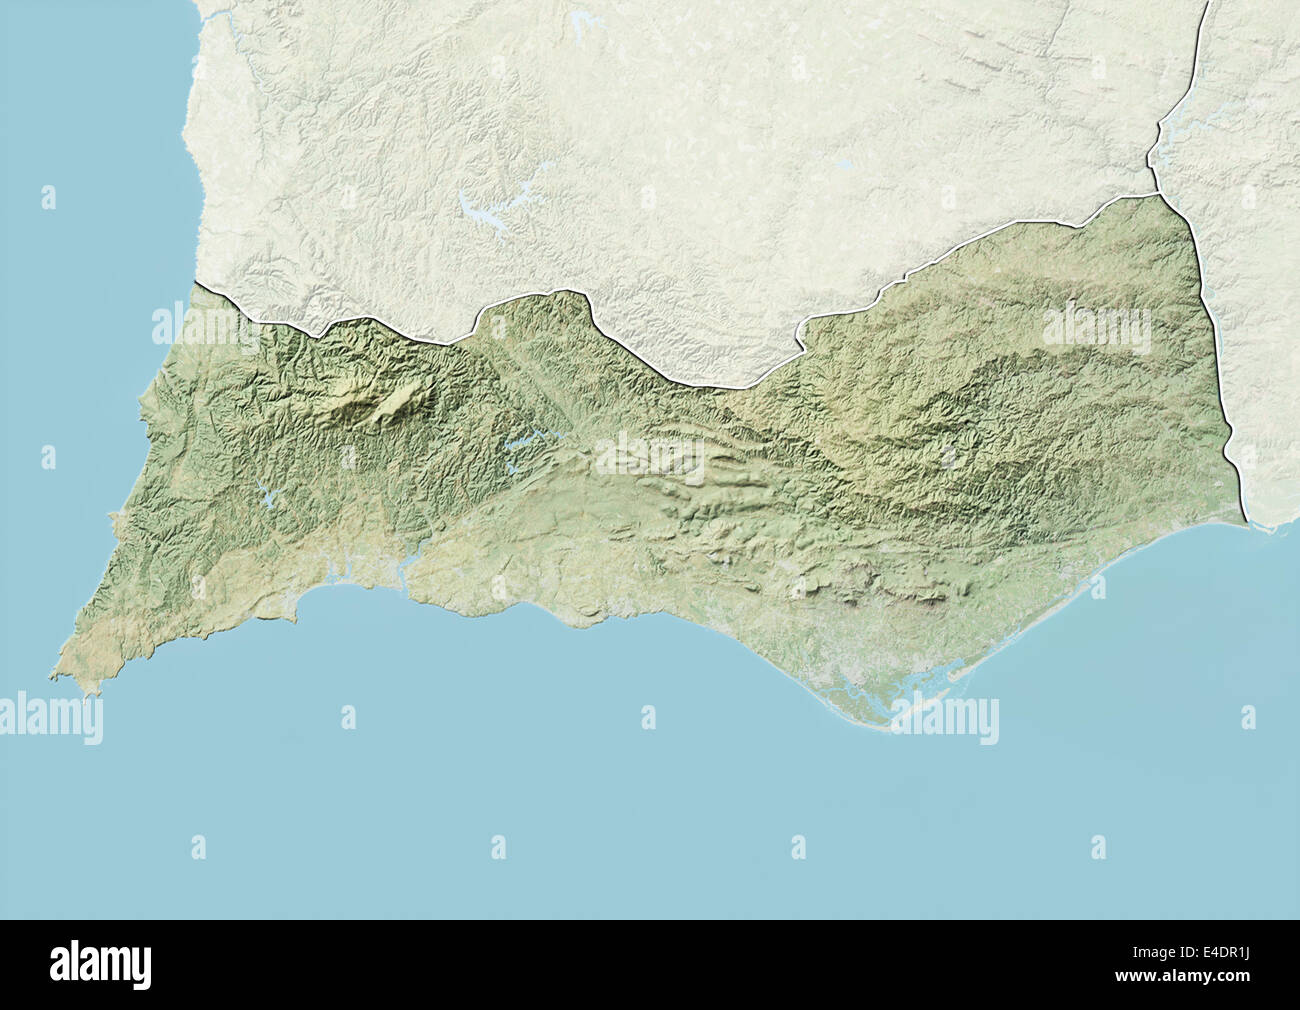 District of Faro, Portugal, Relief Map Stock Photo